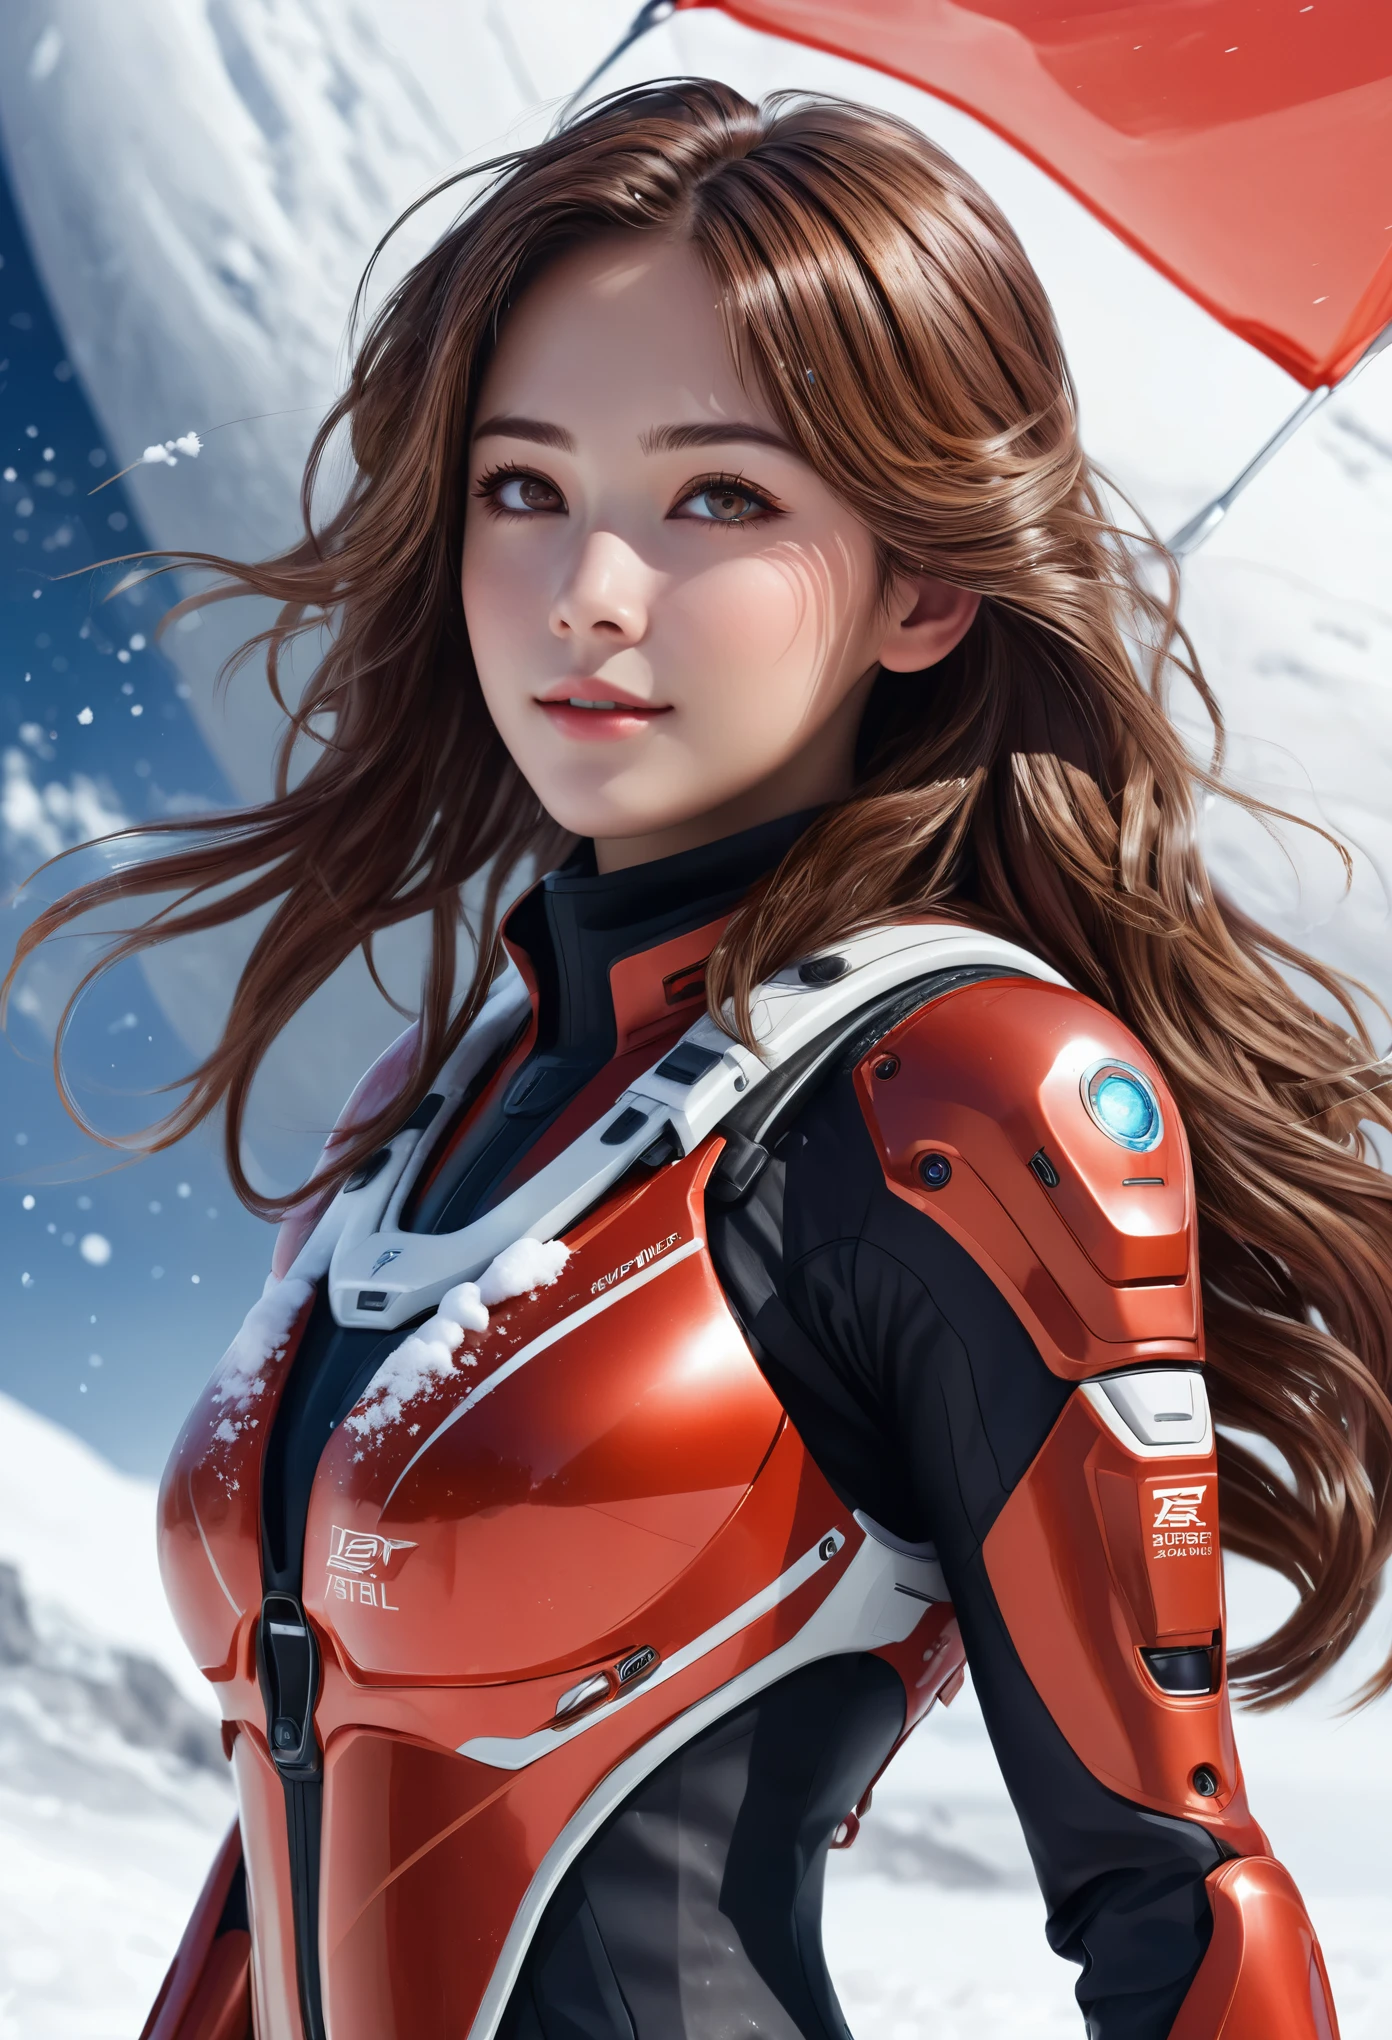 Special operation agent, futuristic tactical red suit, extra detailed, detailed anatomy, detailed face, detailed eyes, 1girls, brown_hair, long wavy brown hair, brown eyes, snow blizzard, strong wind, planet expedition, side view, looking away, futuristic kevlar suit, soft smile, high contrast